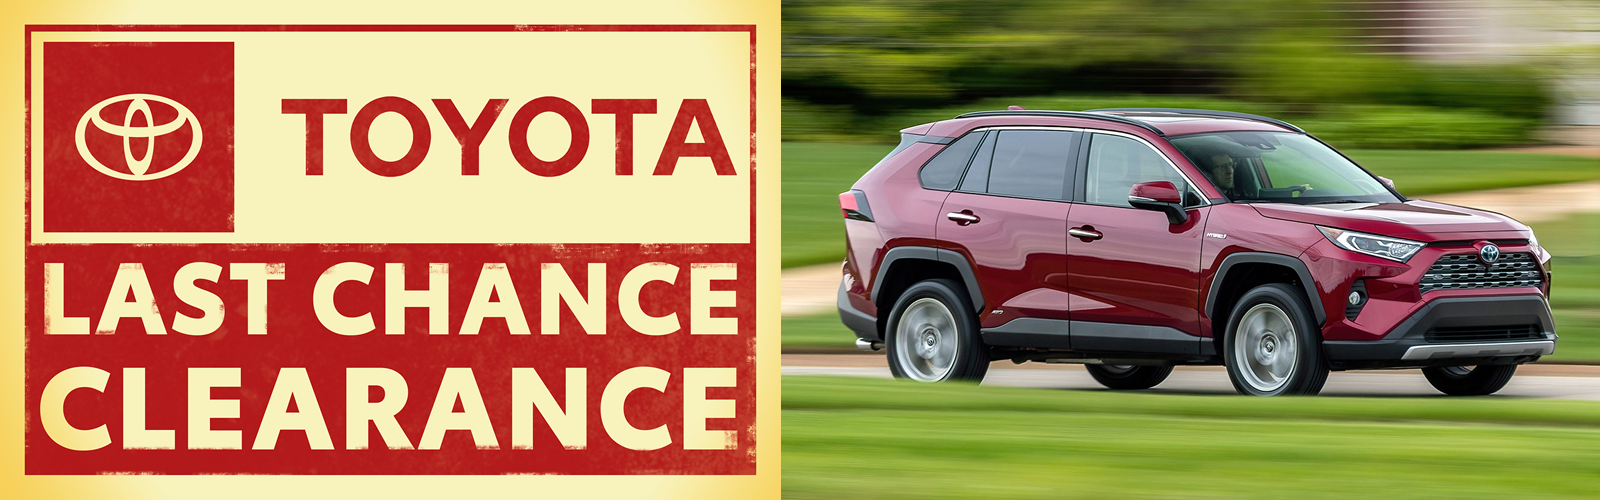 Toyota Last Chance Clearance Sales Event